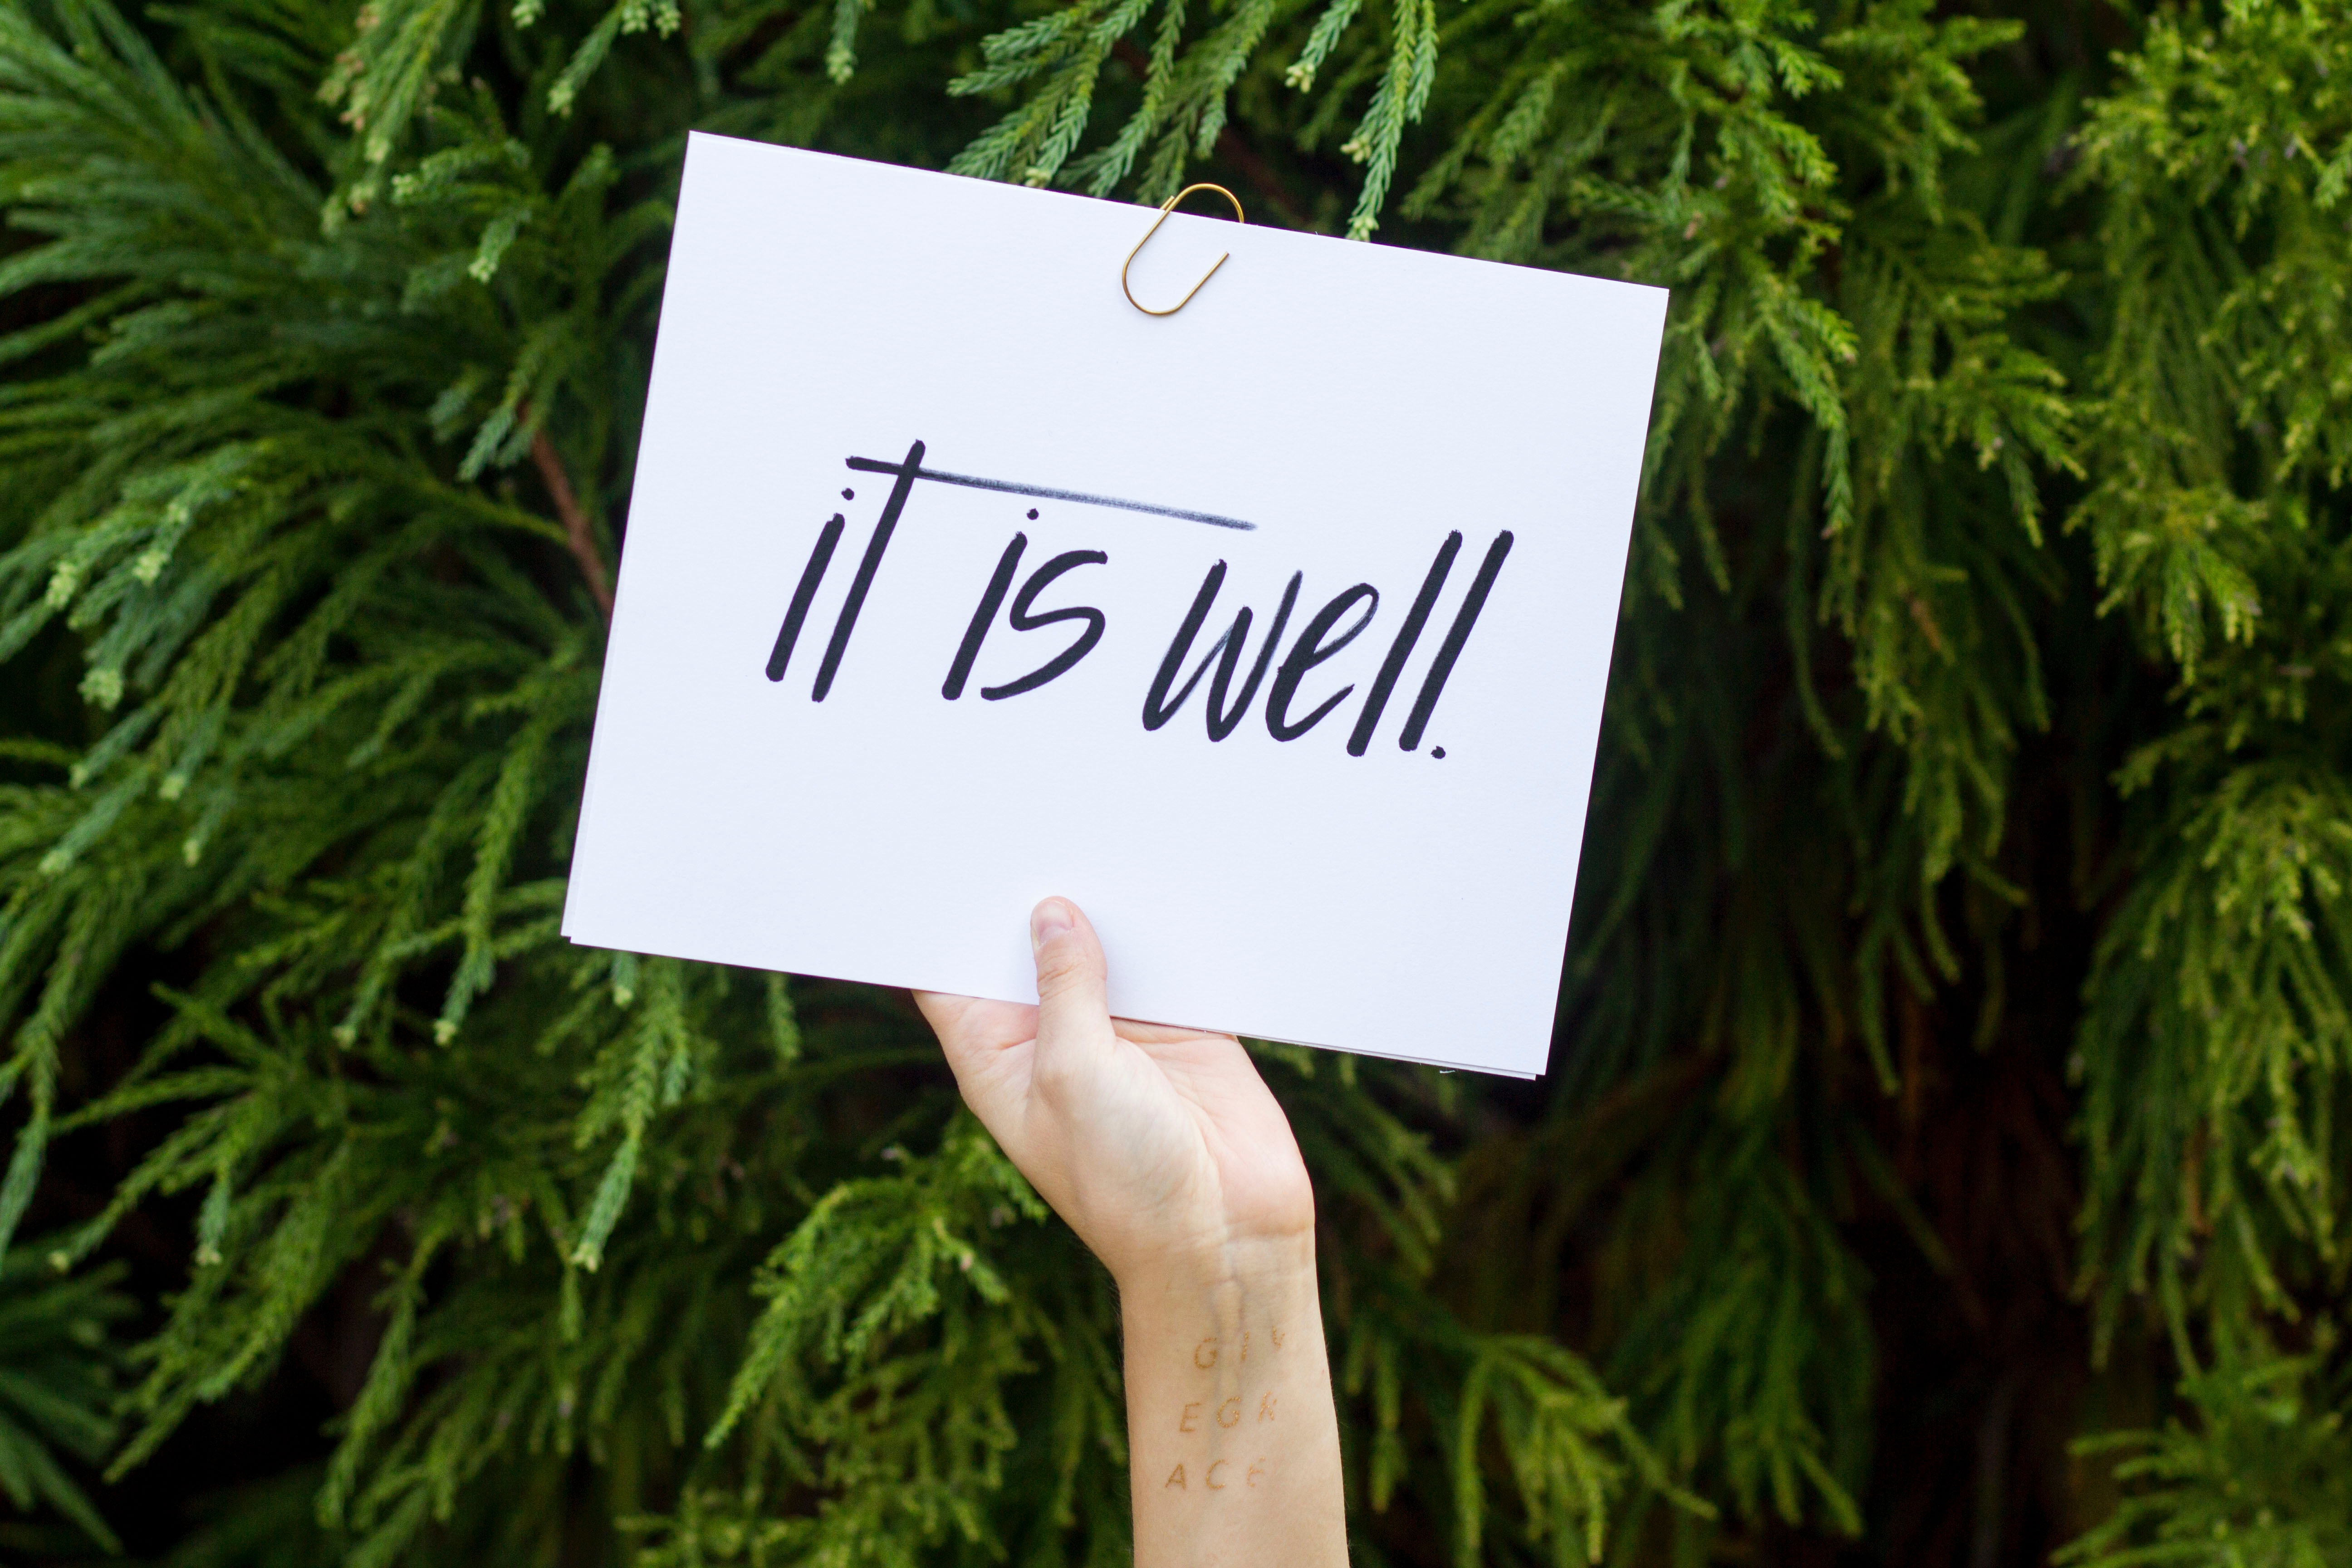 sign saying "it is well"